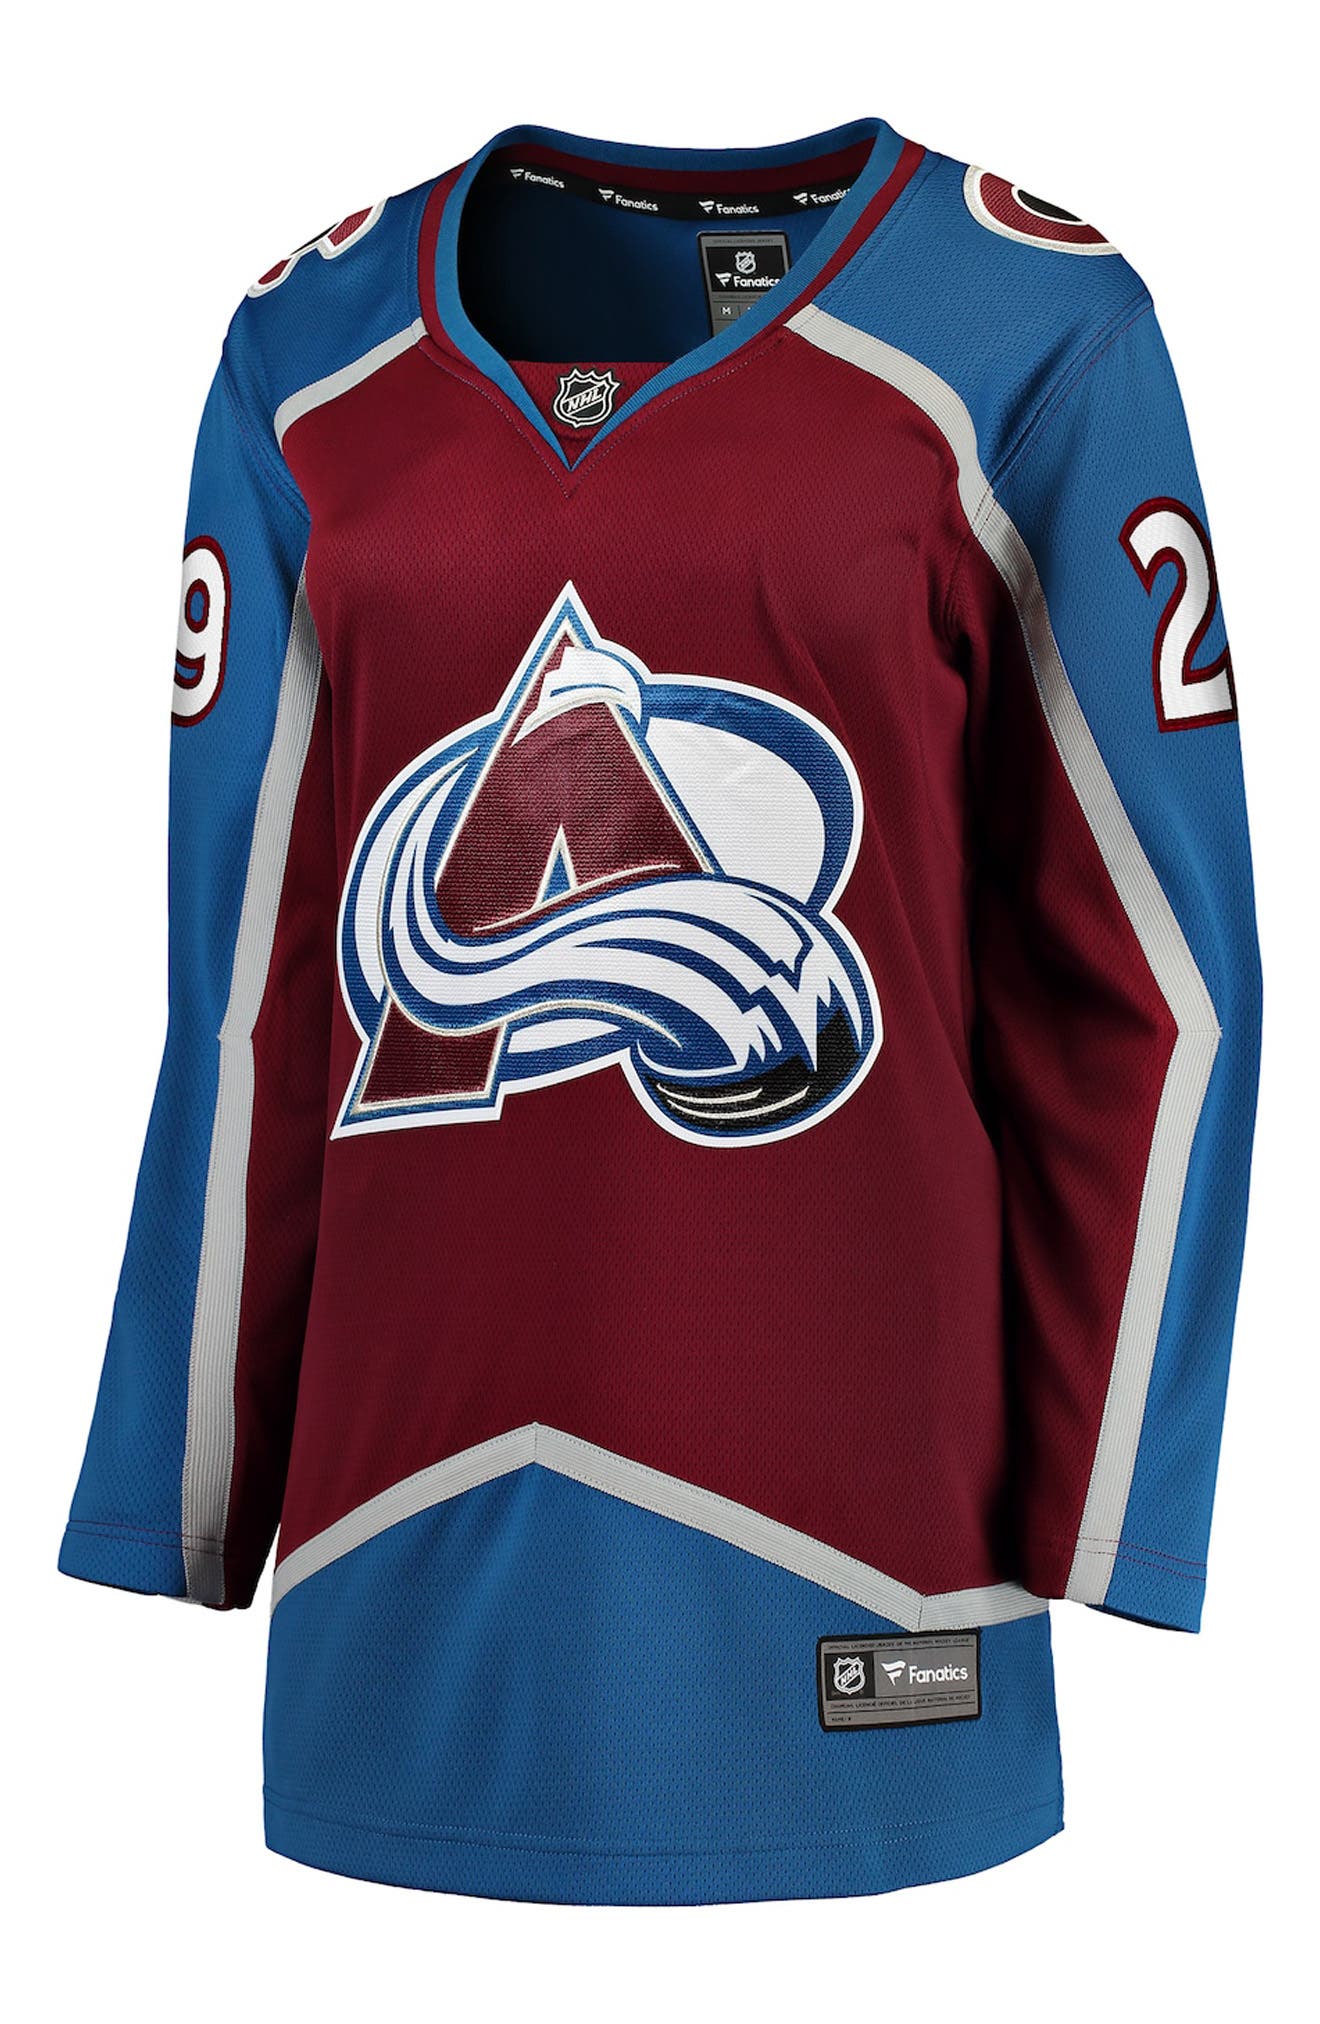 nathan mackinnon jersey for sale